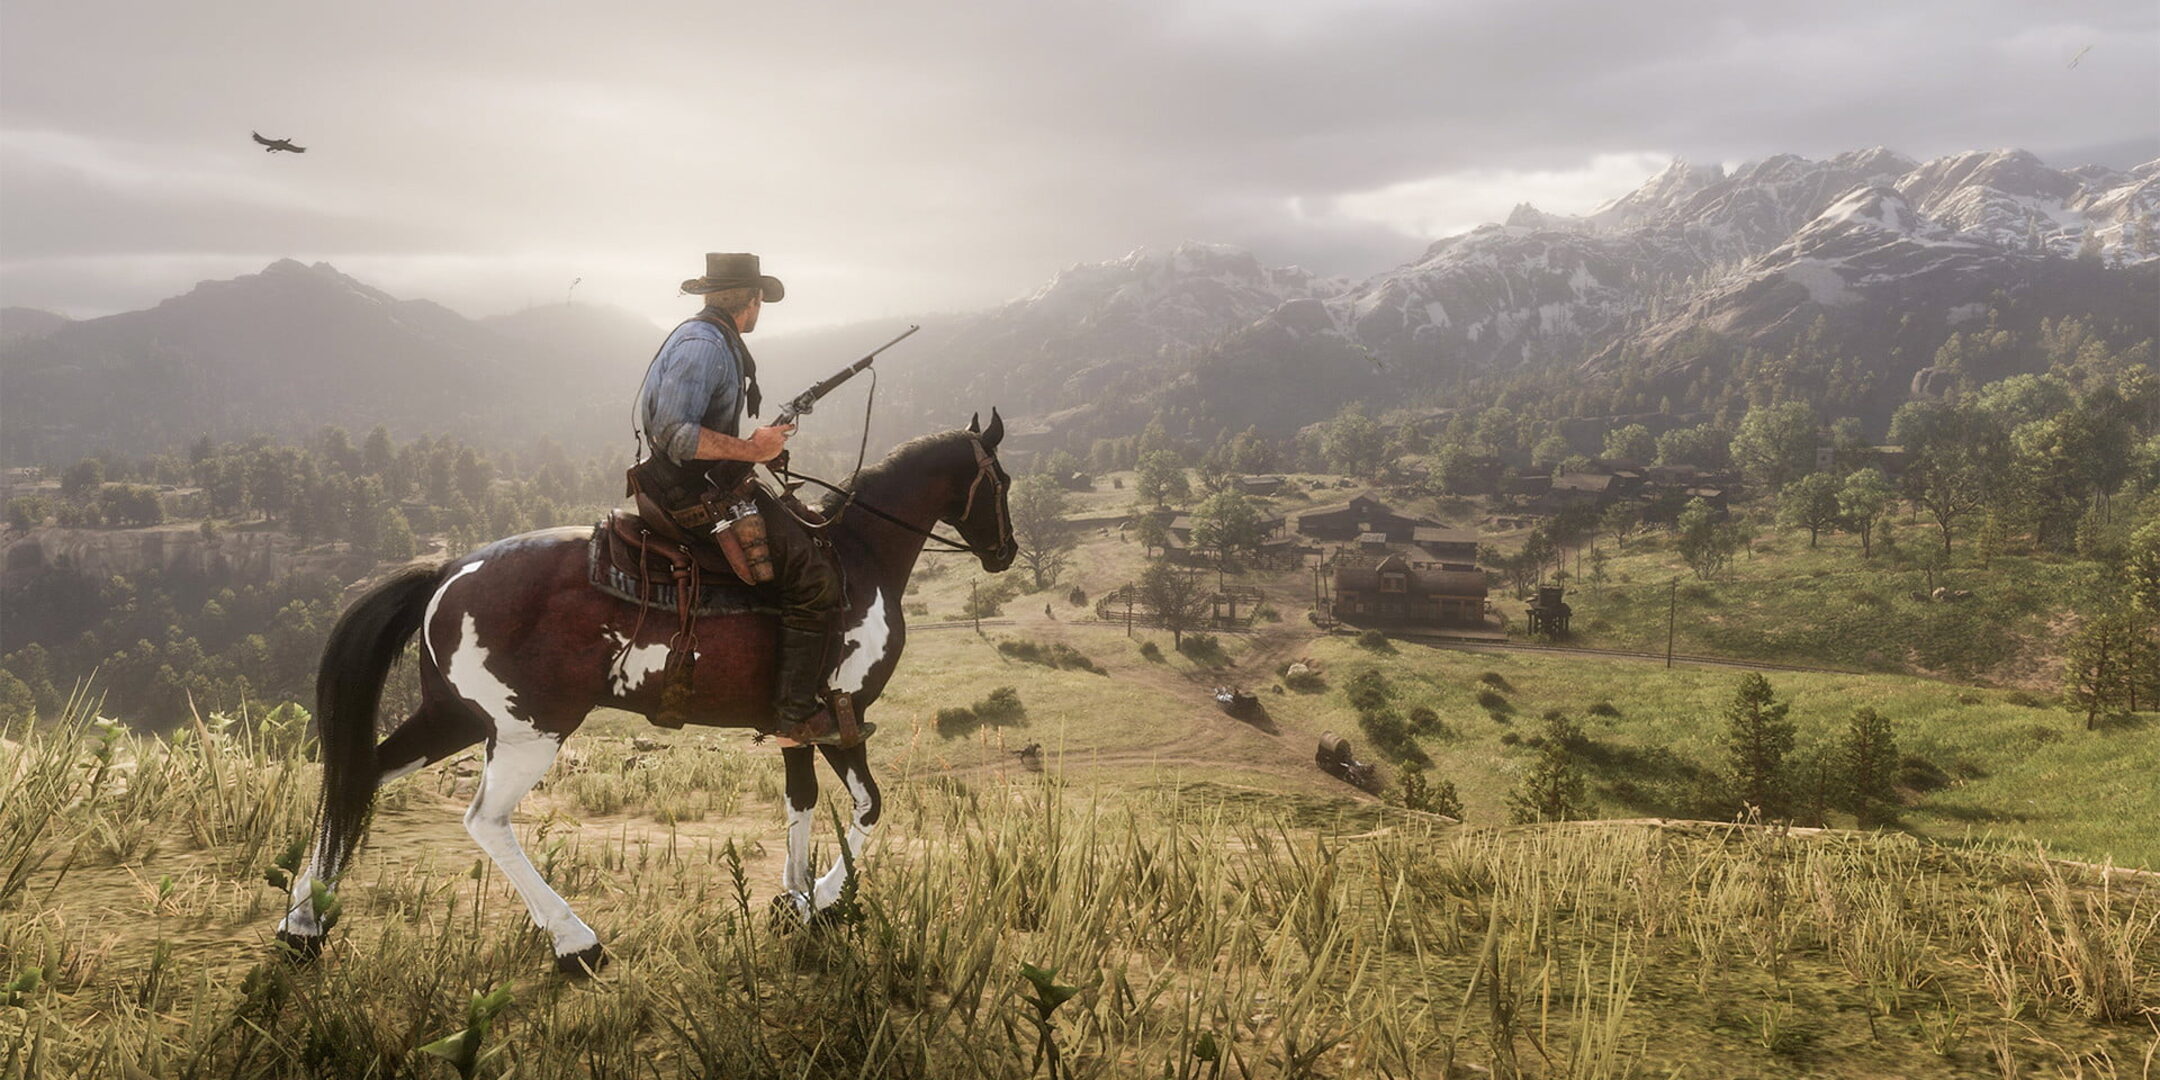 Buy Red Dead Redemption 2 Today! Cheap Xbox Key!